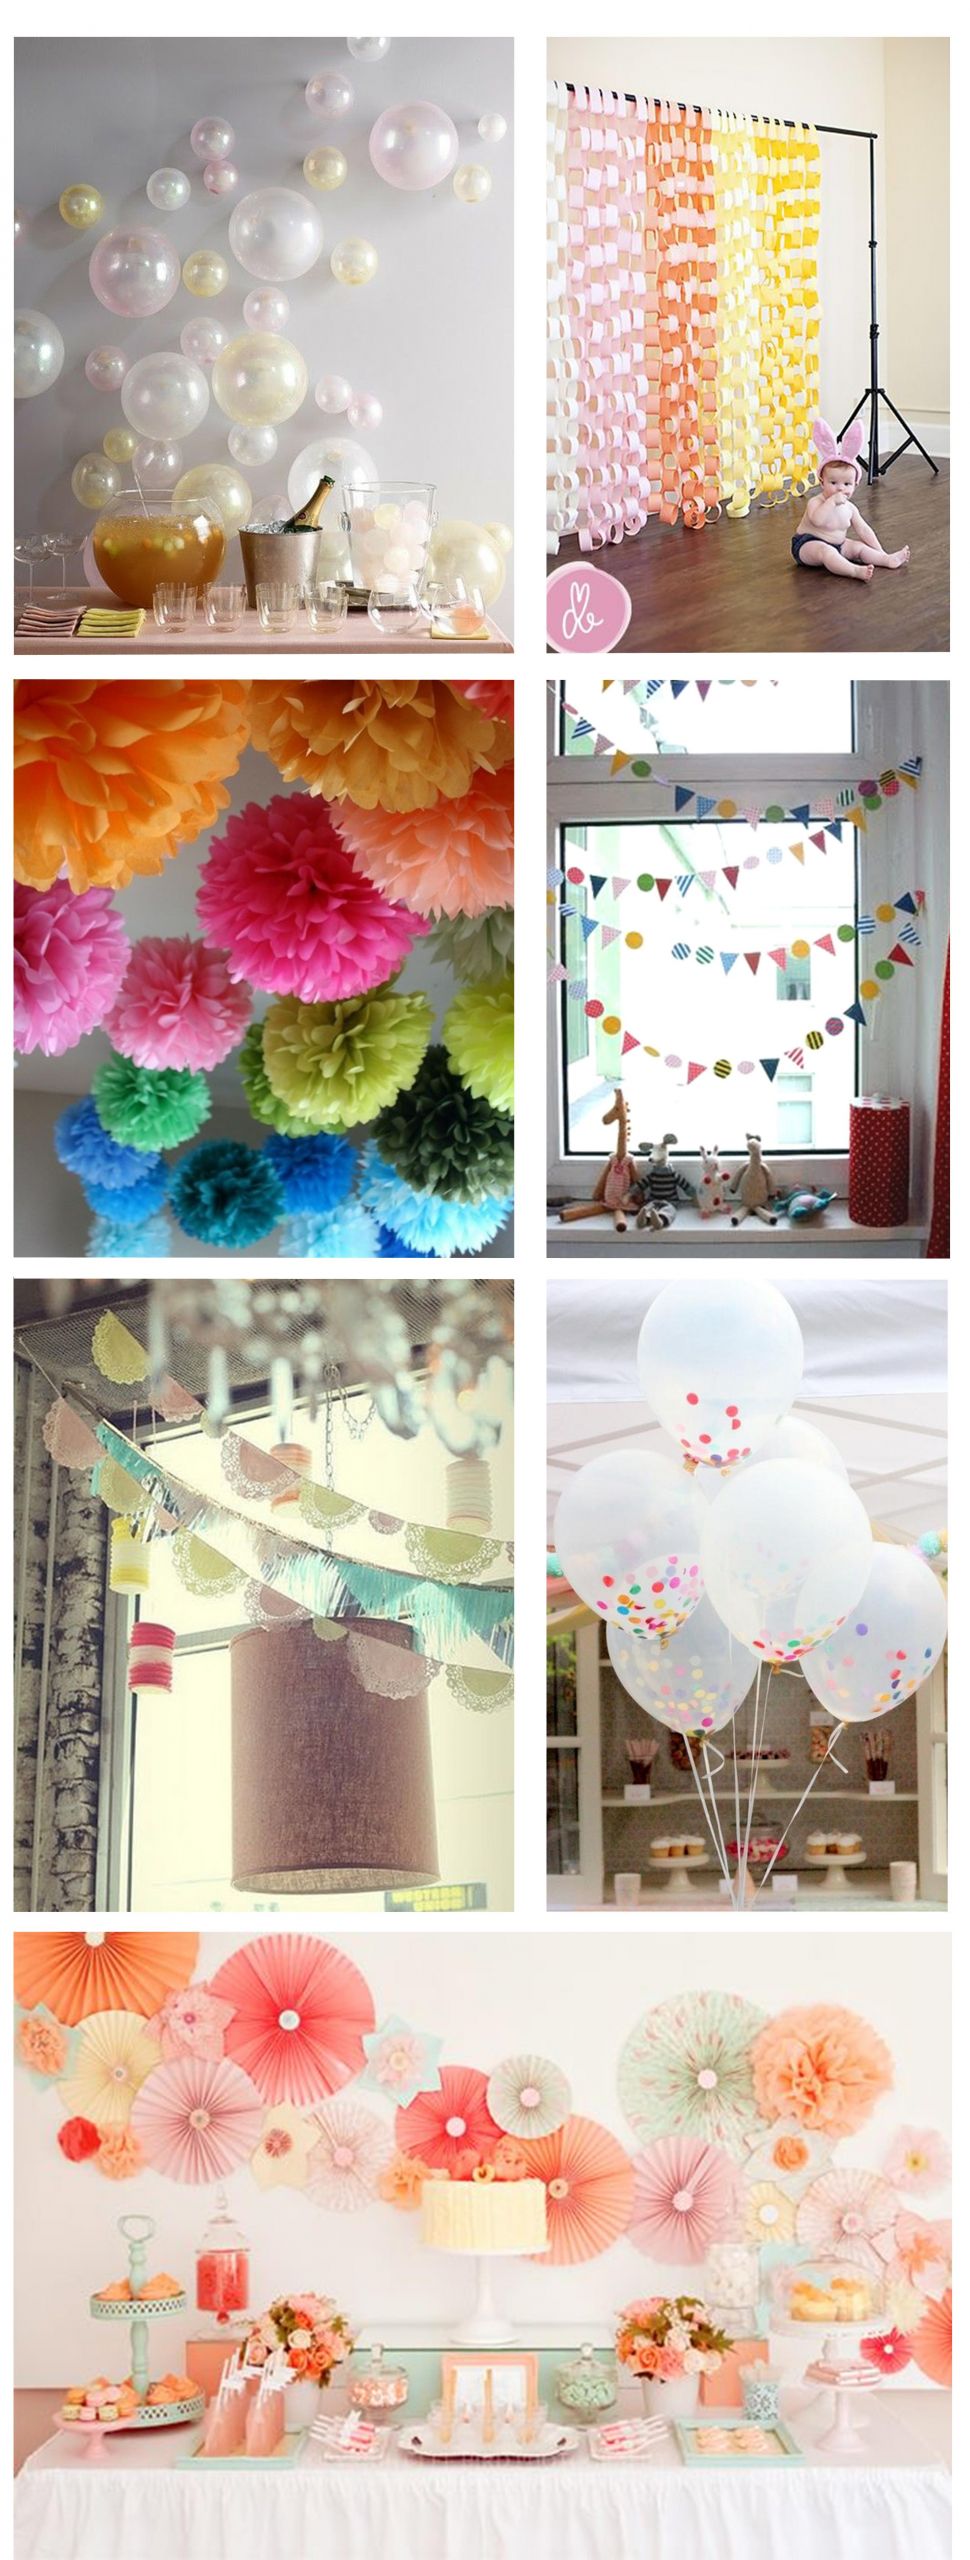 Party Decorations DIY
 Ideas for home made party decorations